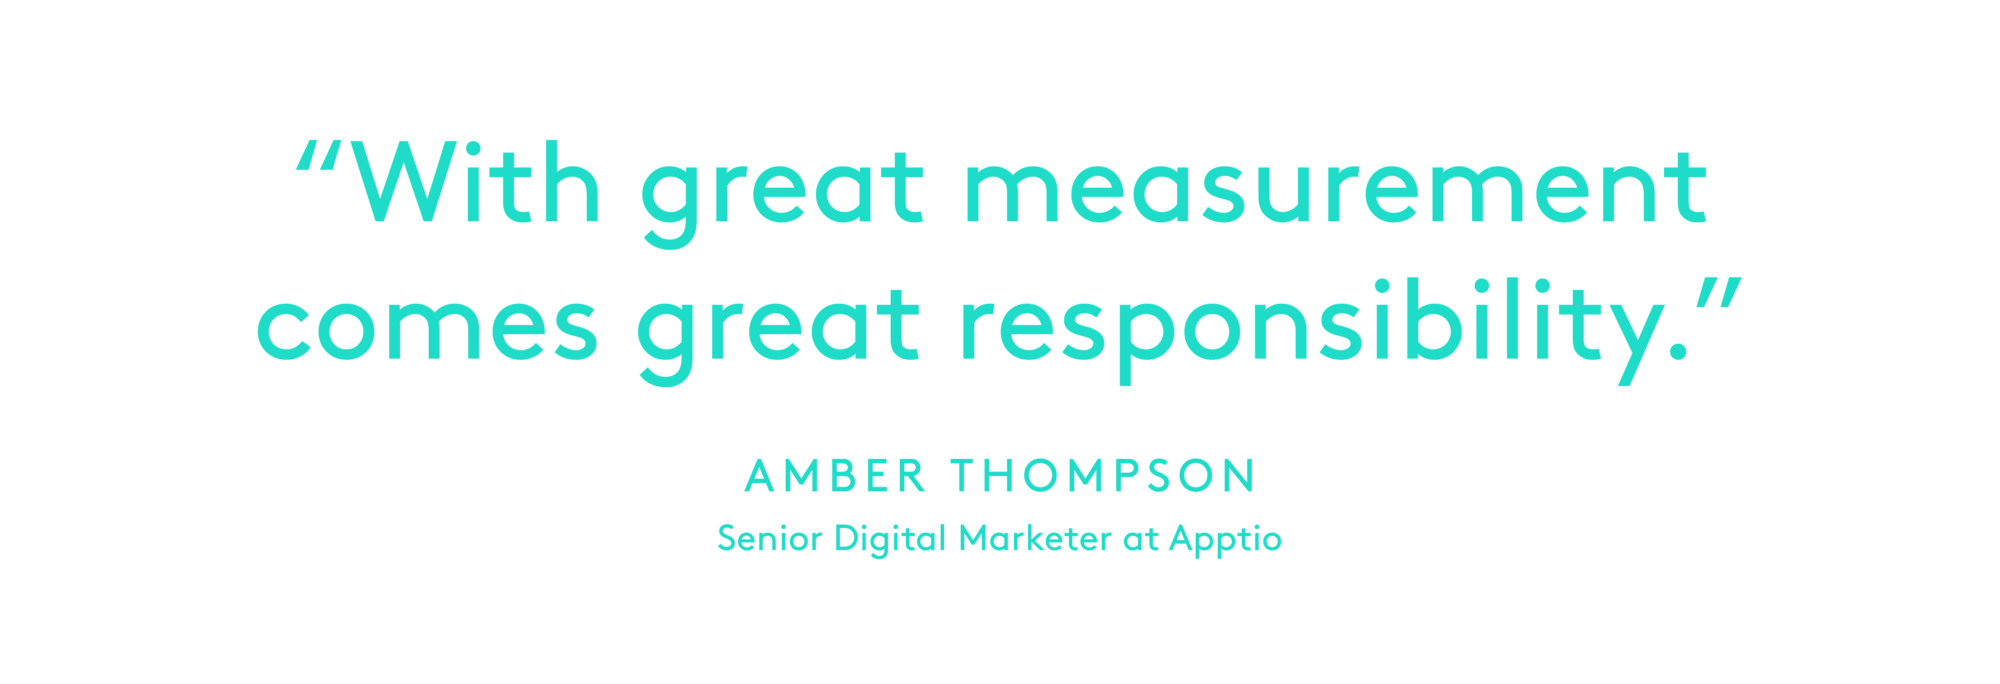 Text image - With great measurement comes great repsonsibility - from Amber Thompson, Senior Digital Marketing leader at Apptio